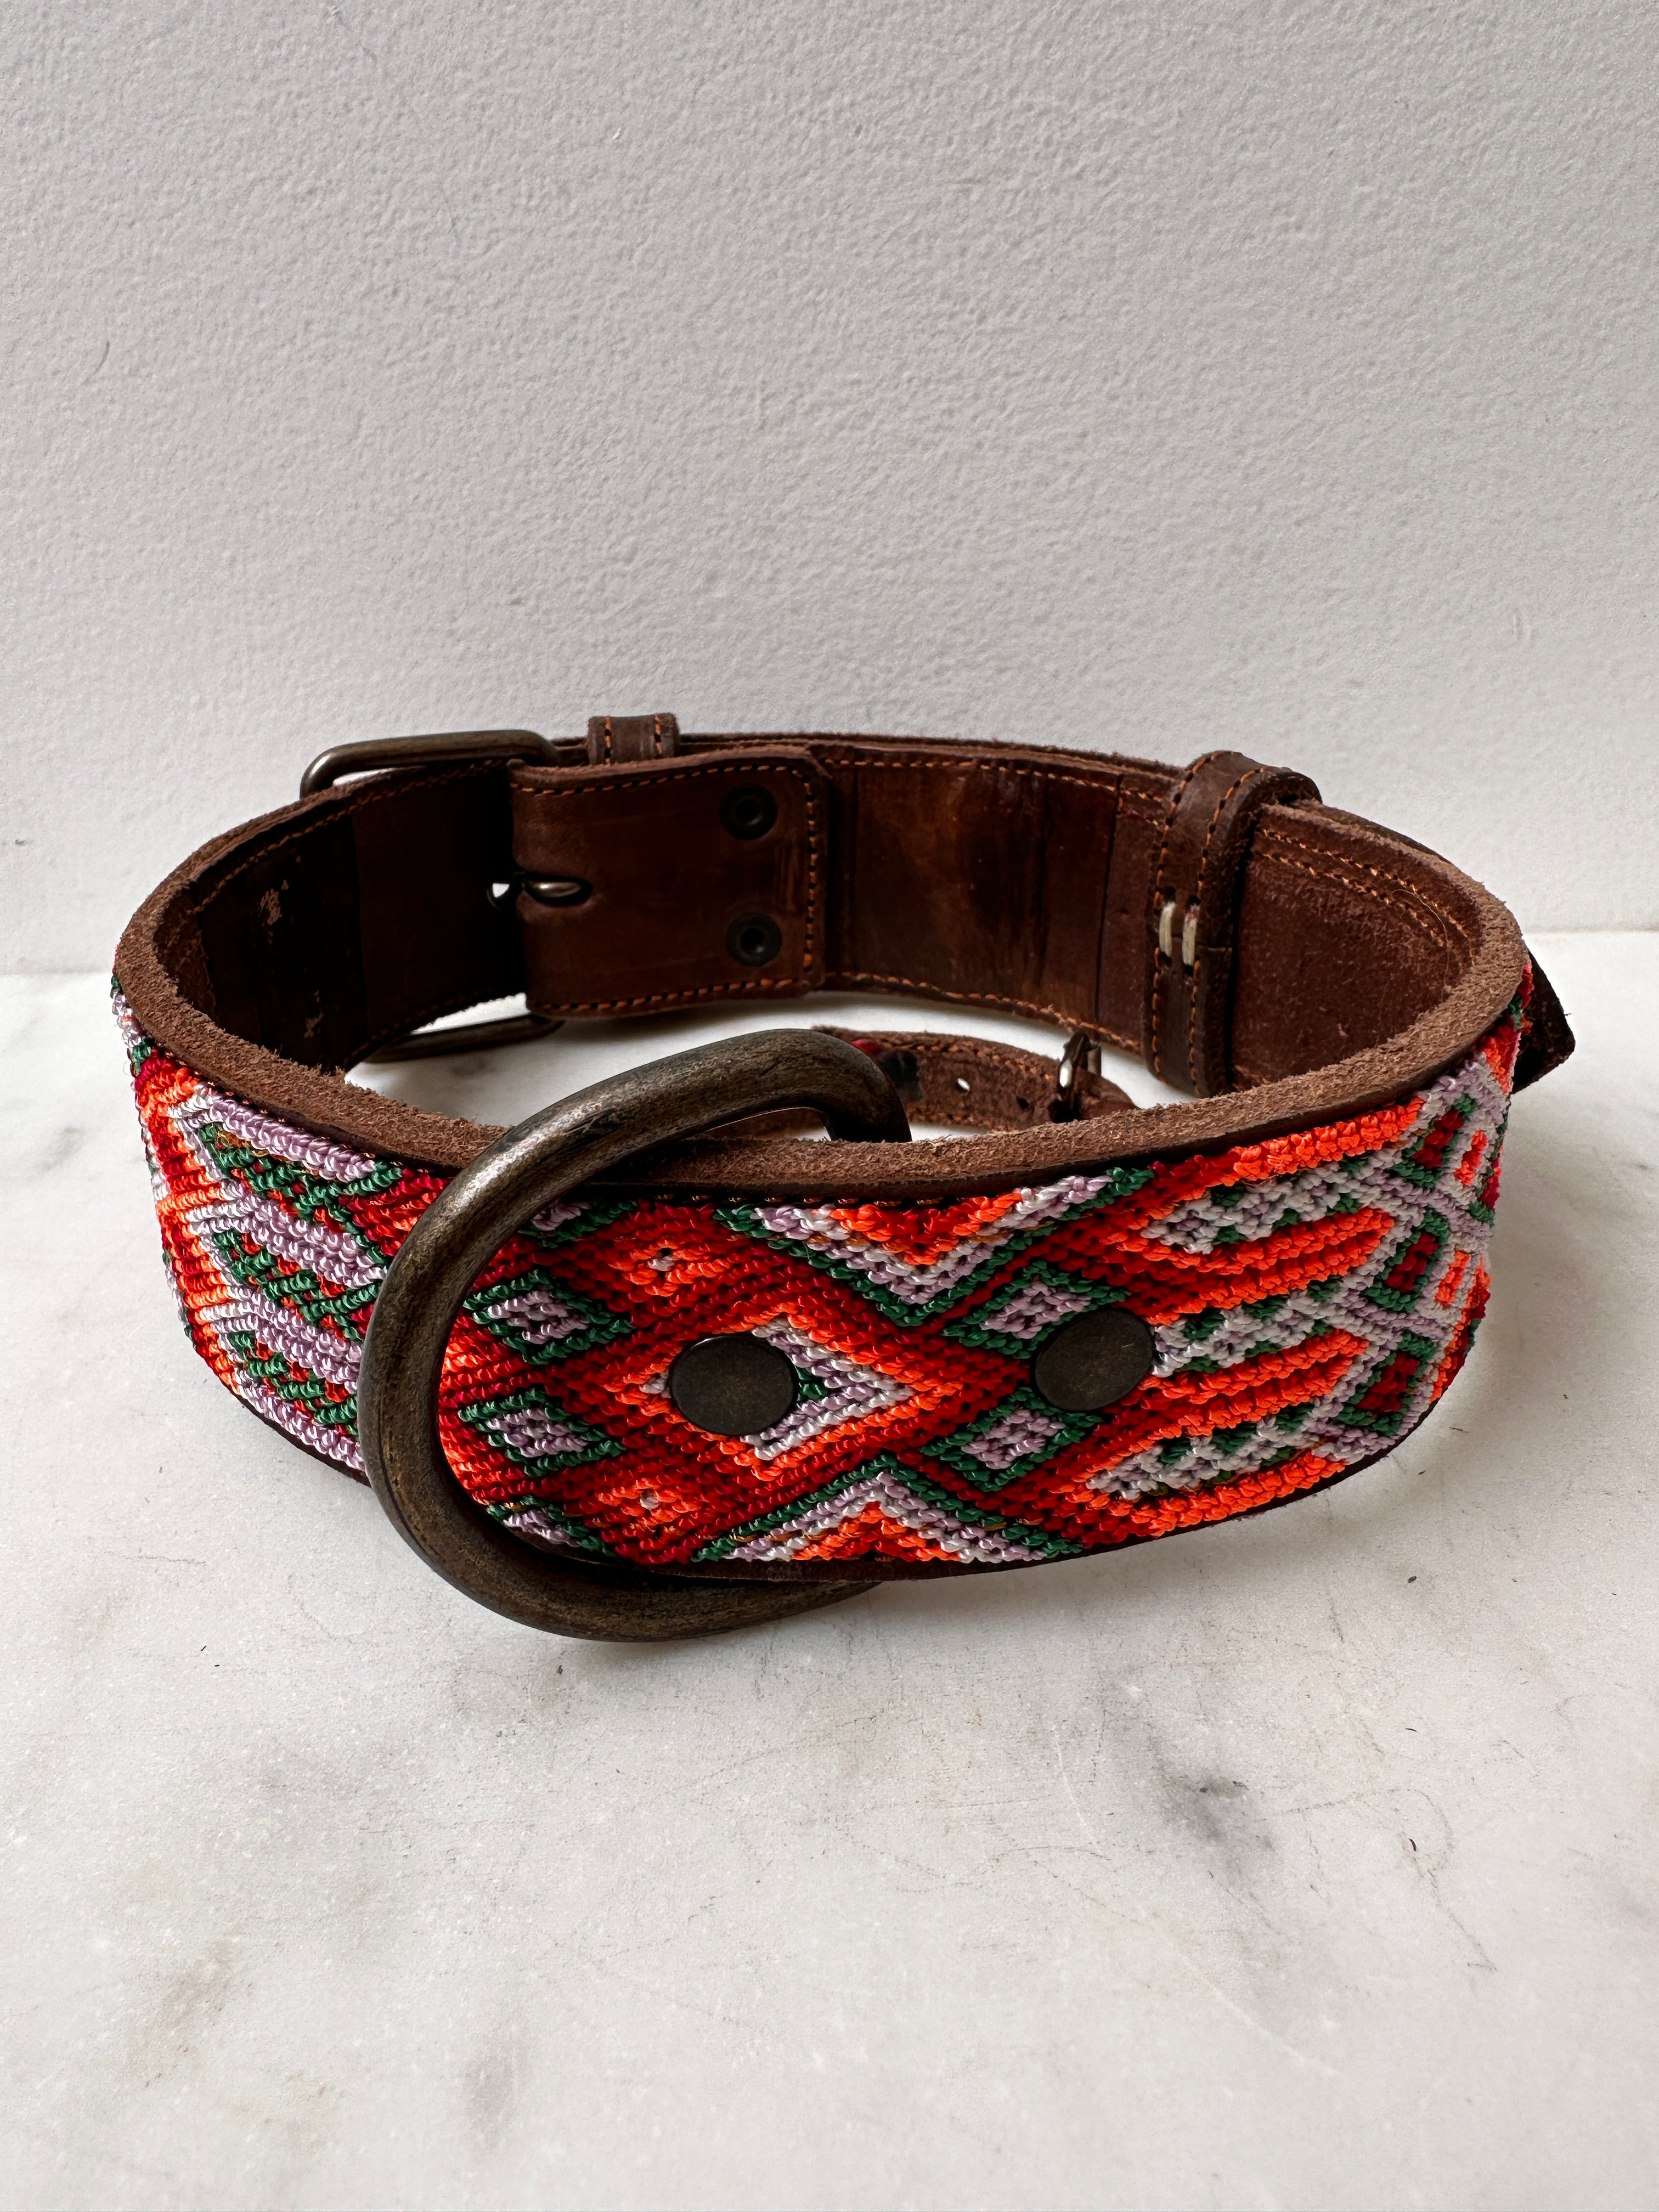 Future Nomads Homewares One Size Huichol Leather Wide Dog Collar L9